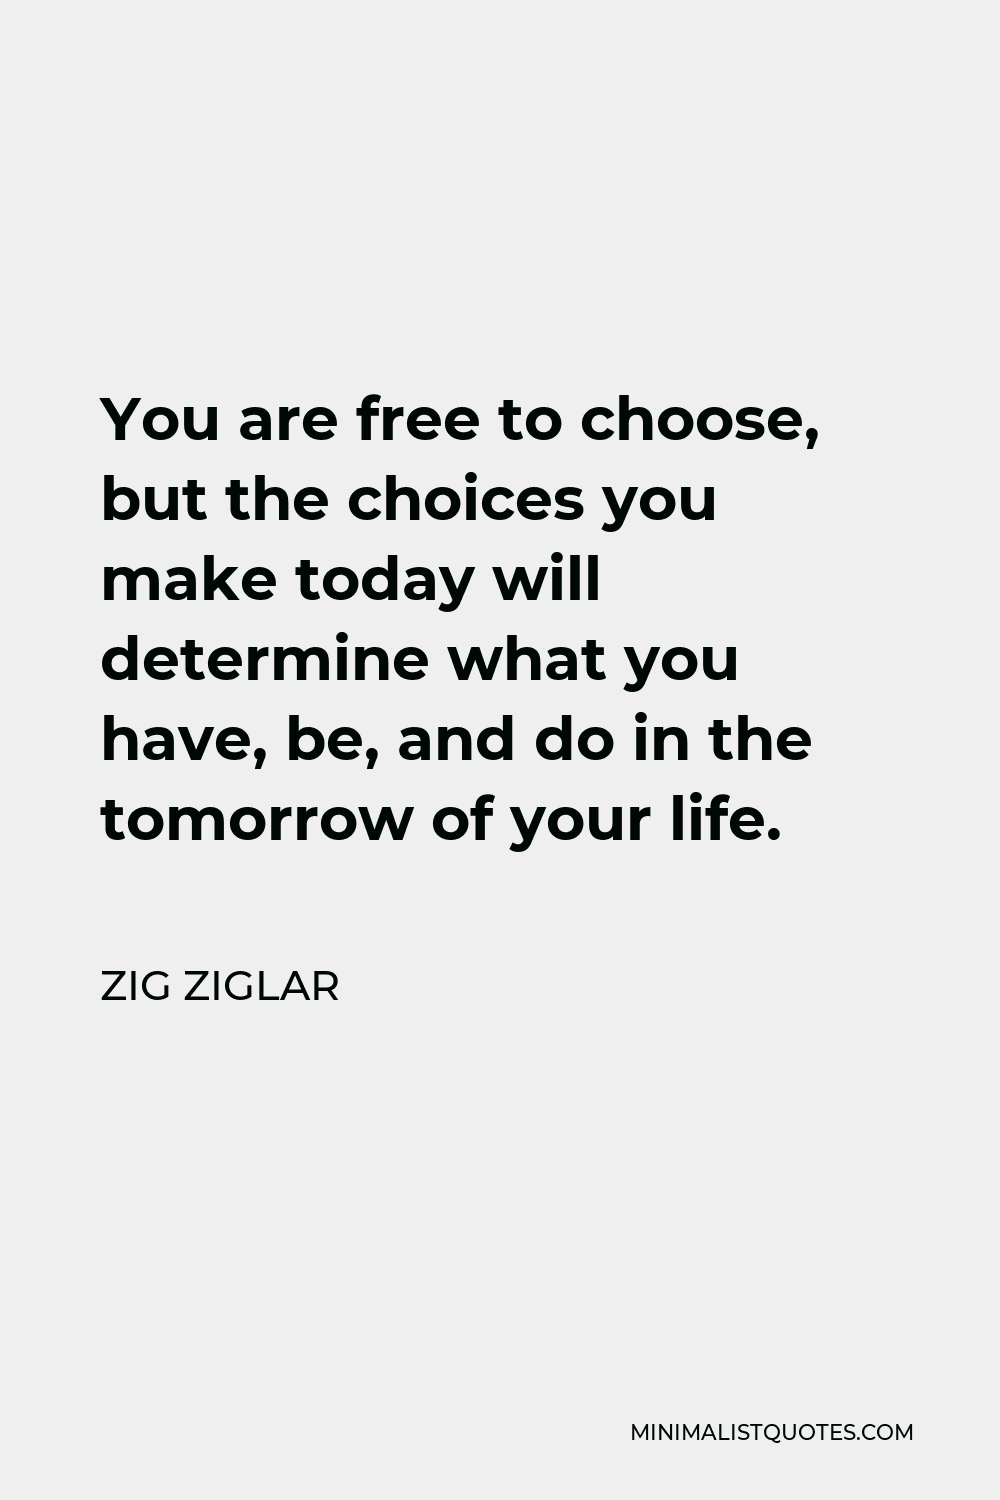 Zig Ziglar Quote - You are free to choose, but the choices you make today will determine what you have, be, and do in the tomorrow of your life.